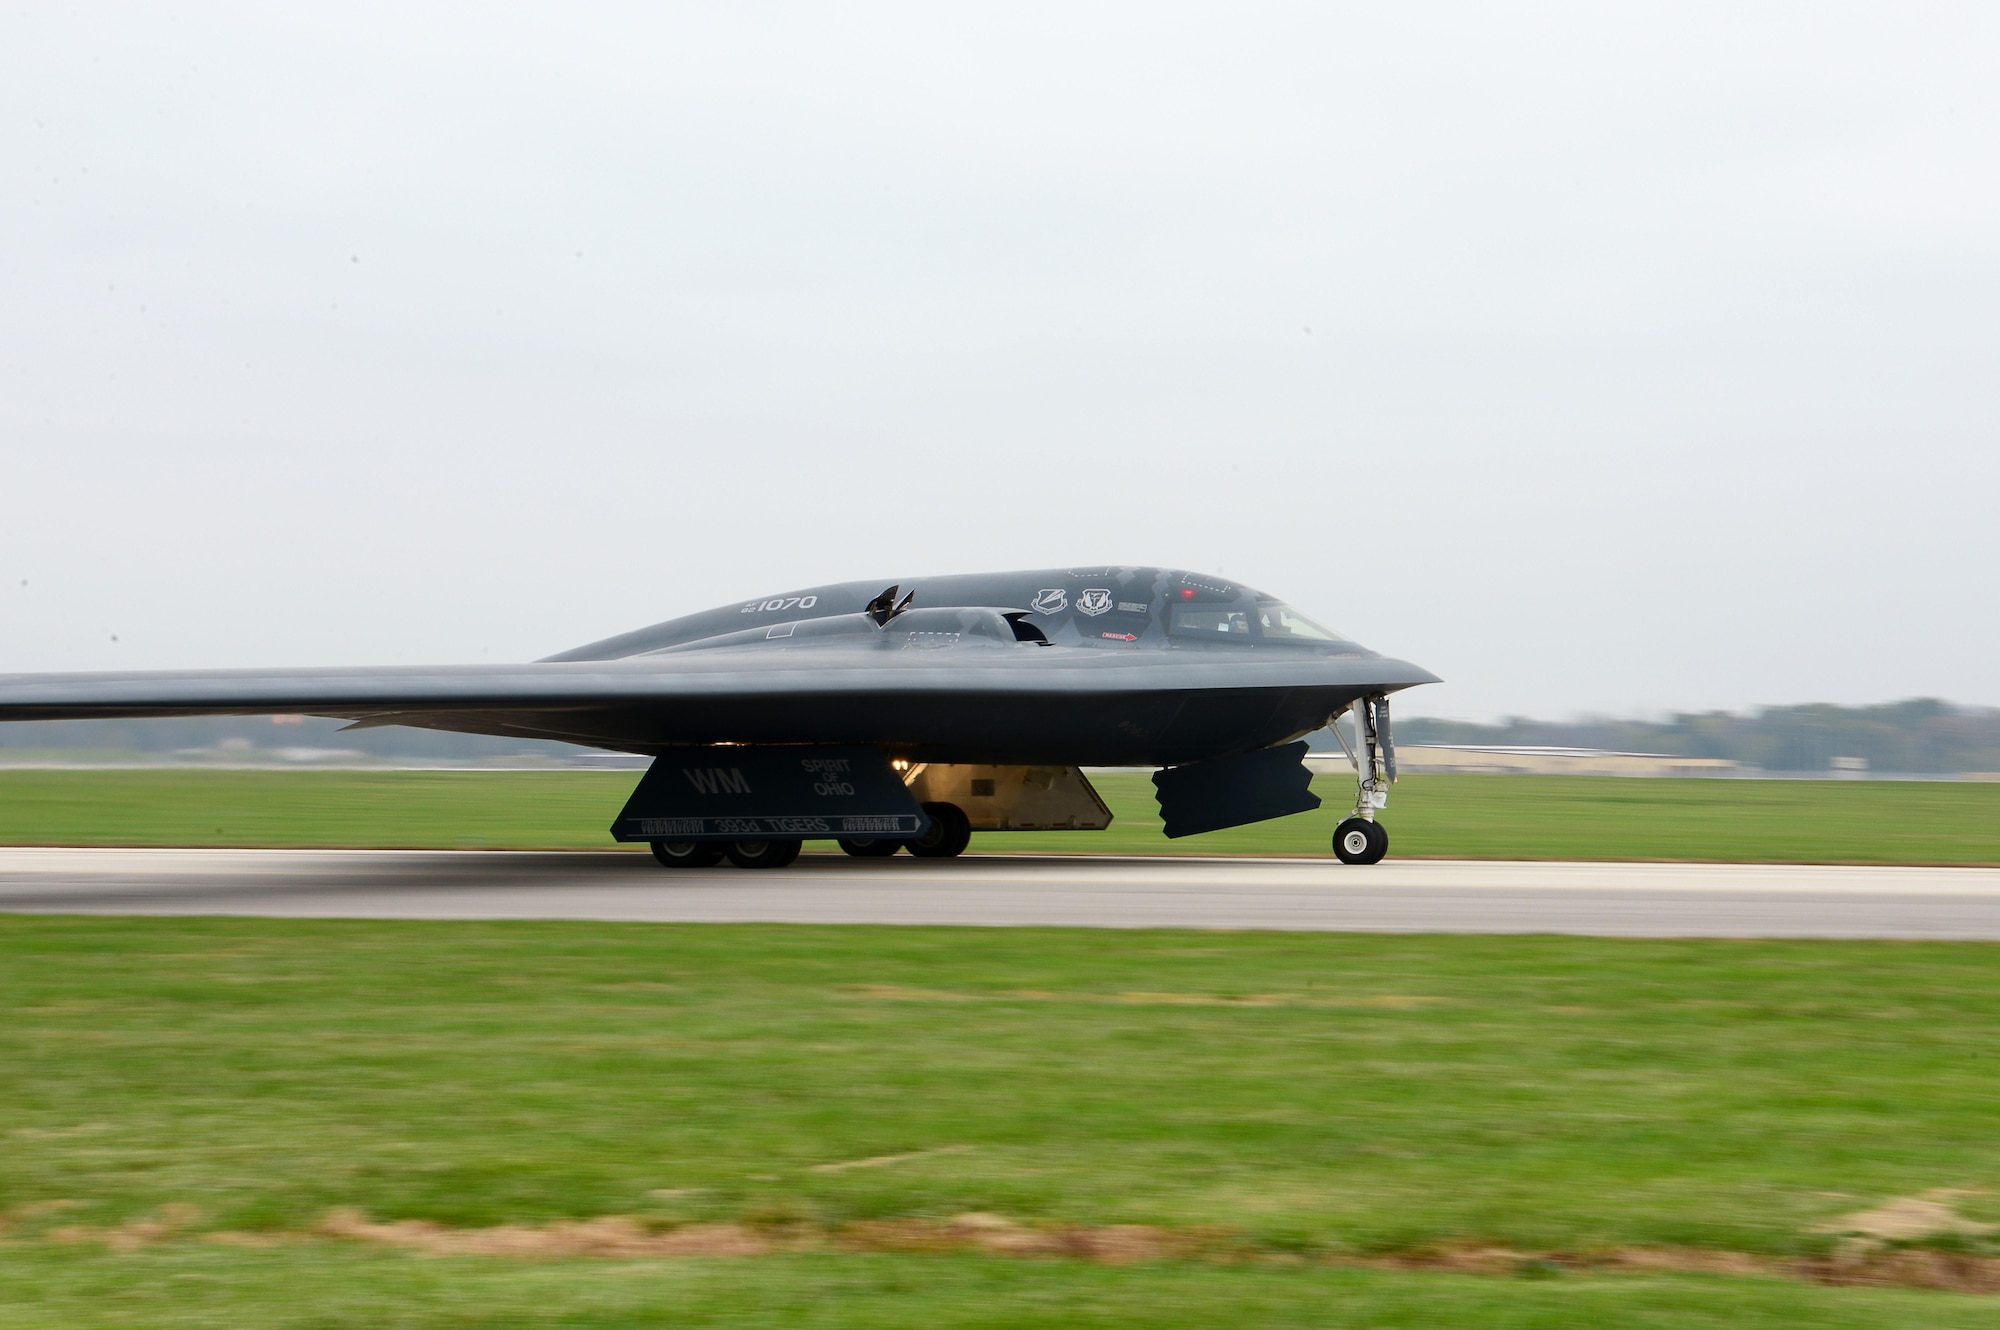 A U.S. Air Force B-2 Spirit taxis on the flightline during Exercise Global Thunder 17 at Whiteman Air Force Base, Mo., Oct. 30, 2016. Exercise Global Thunder is an annual command and control and field training exercise designed to train Department of Defense forces and assess joint operational readiness across all of USSTRATCOM’s mission areas, with a specific focus on nuclear readiness. (U.S. Air Force photo by Tech. Sgt. Andy Kin)